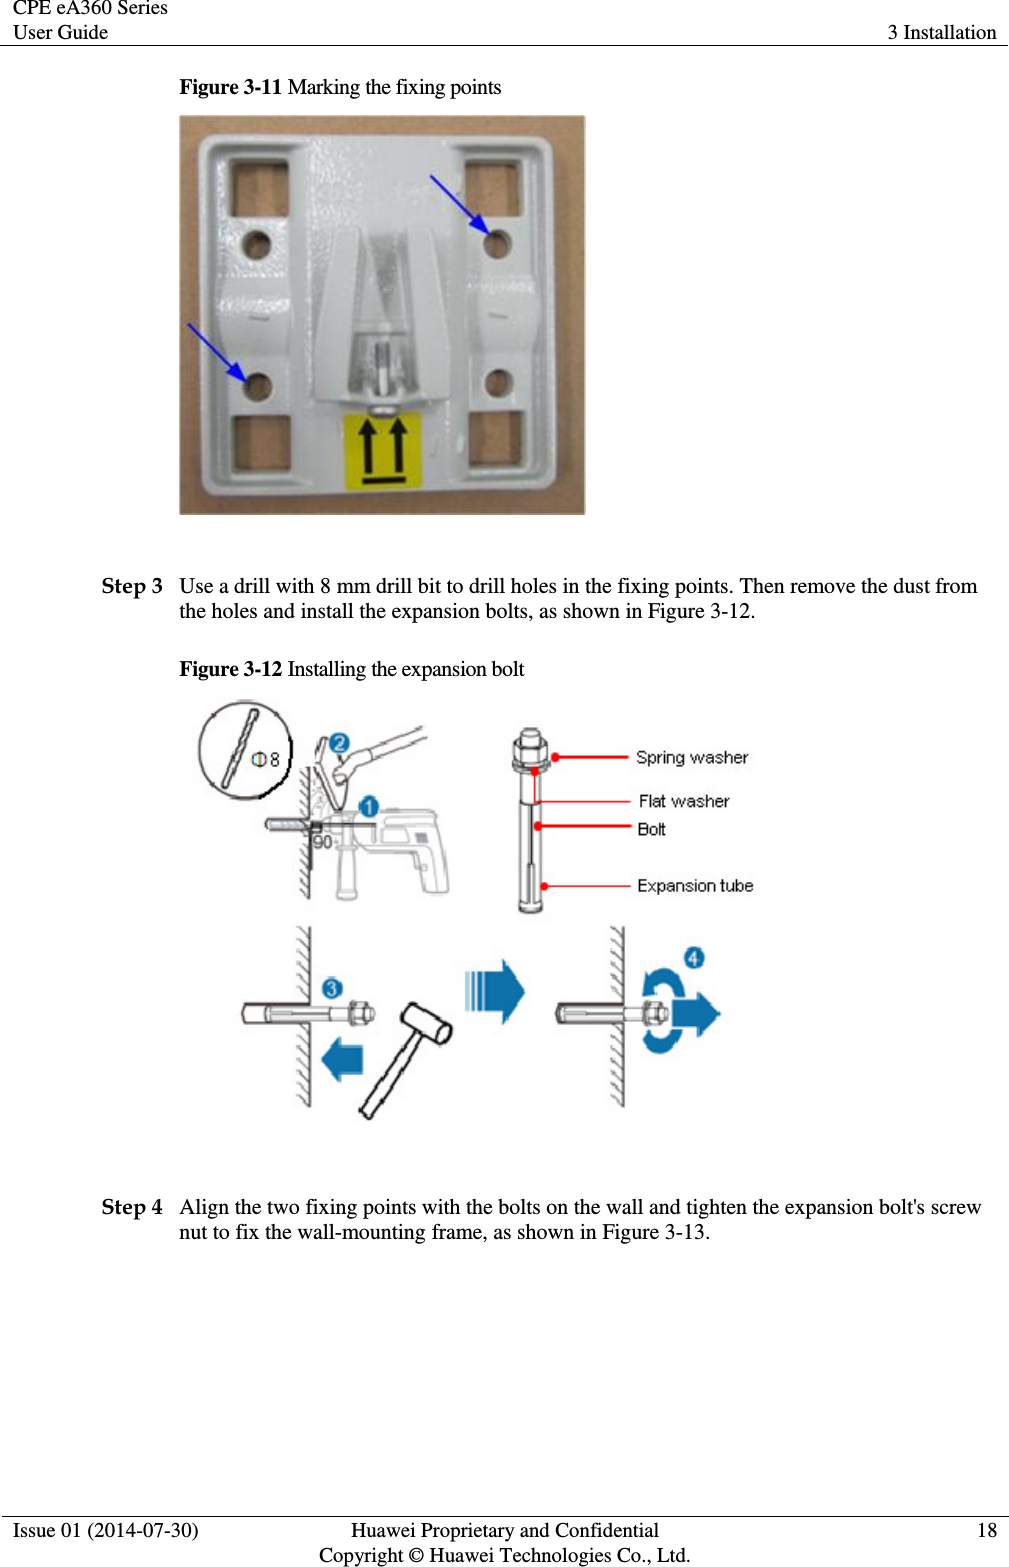 CPE eA360 Series User Guide 3 Installation  Issue 01 (2014-07-30) Huawei Proprietary and Confidential                                     Copyright © Huawei Technologies Co., Ltd. 18  Figure 3-11 Marking the fixing points   Step 3 Use a drill with 8 mm drill bit to drill holes in the fixing points. Then remove the dust from the holes and install the expansion bolts, as shown in Figure 3-12. Figure 3-12 Installing the expansion bolt   Step 4 Align the two fixing points with the bolts on the wall and tighten the expansion bolt&apos;s screw nut to fix the wall-mounting frame, as shown in Figure 3-13. 